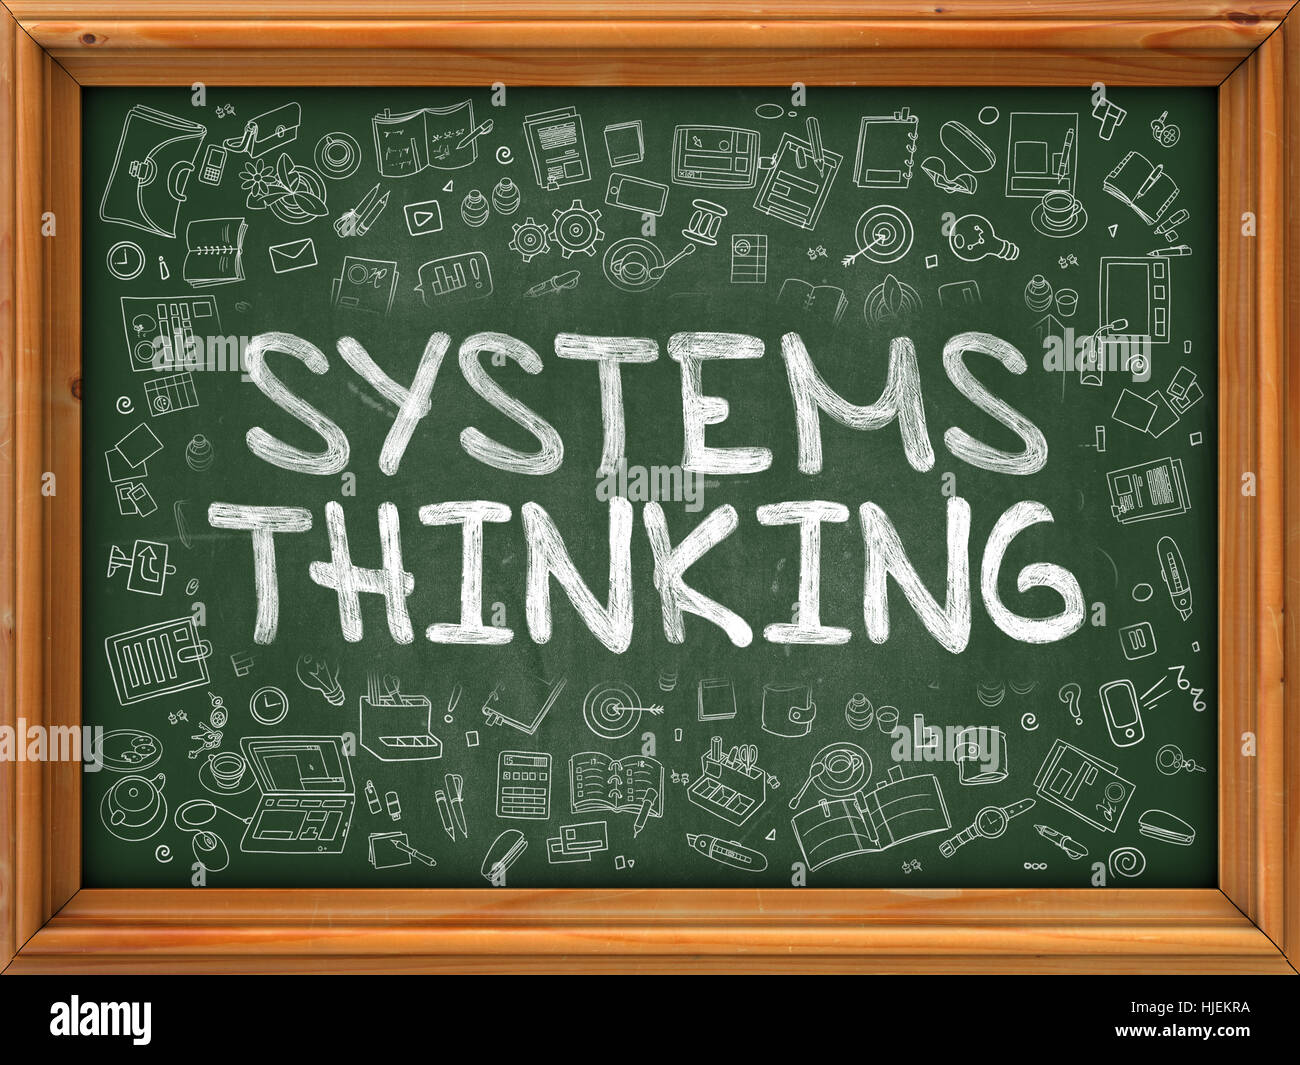 Systems Thinking - Hand Drawn on Green Chalkboard. Stock Photo